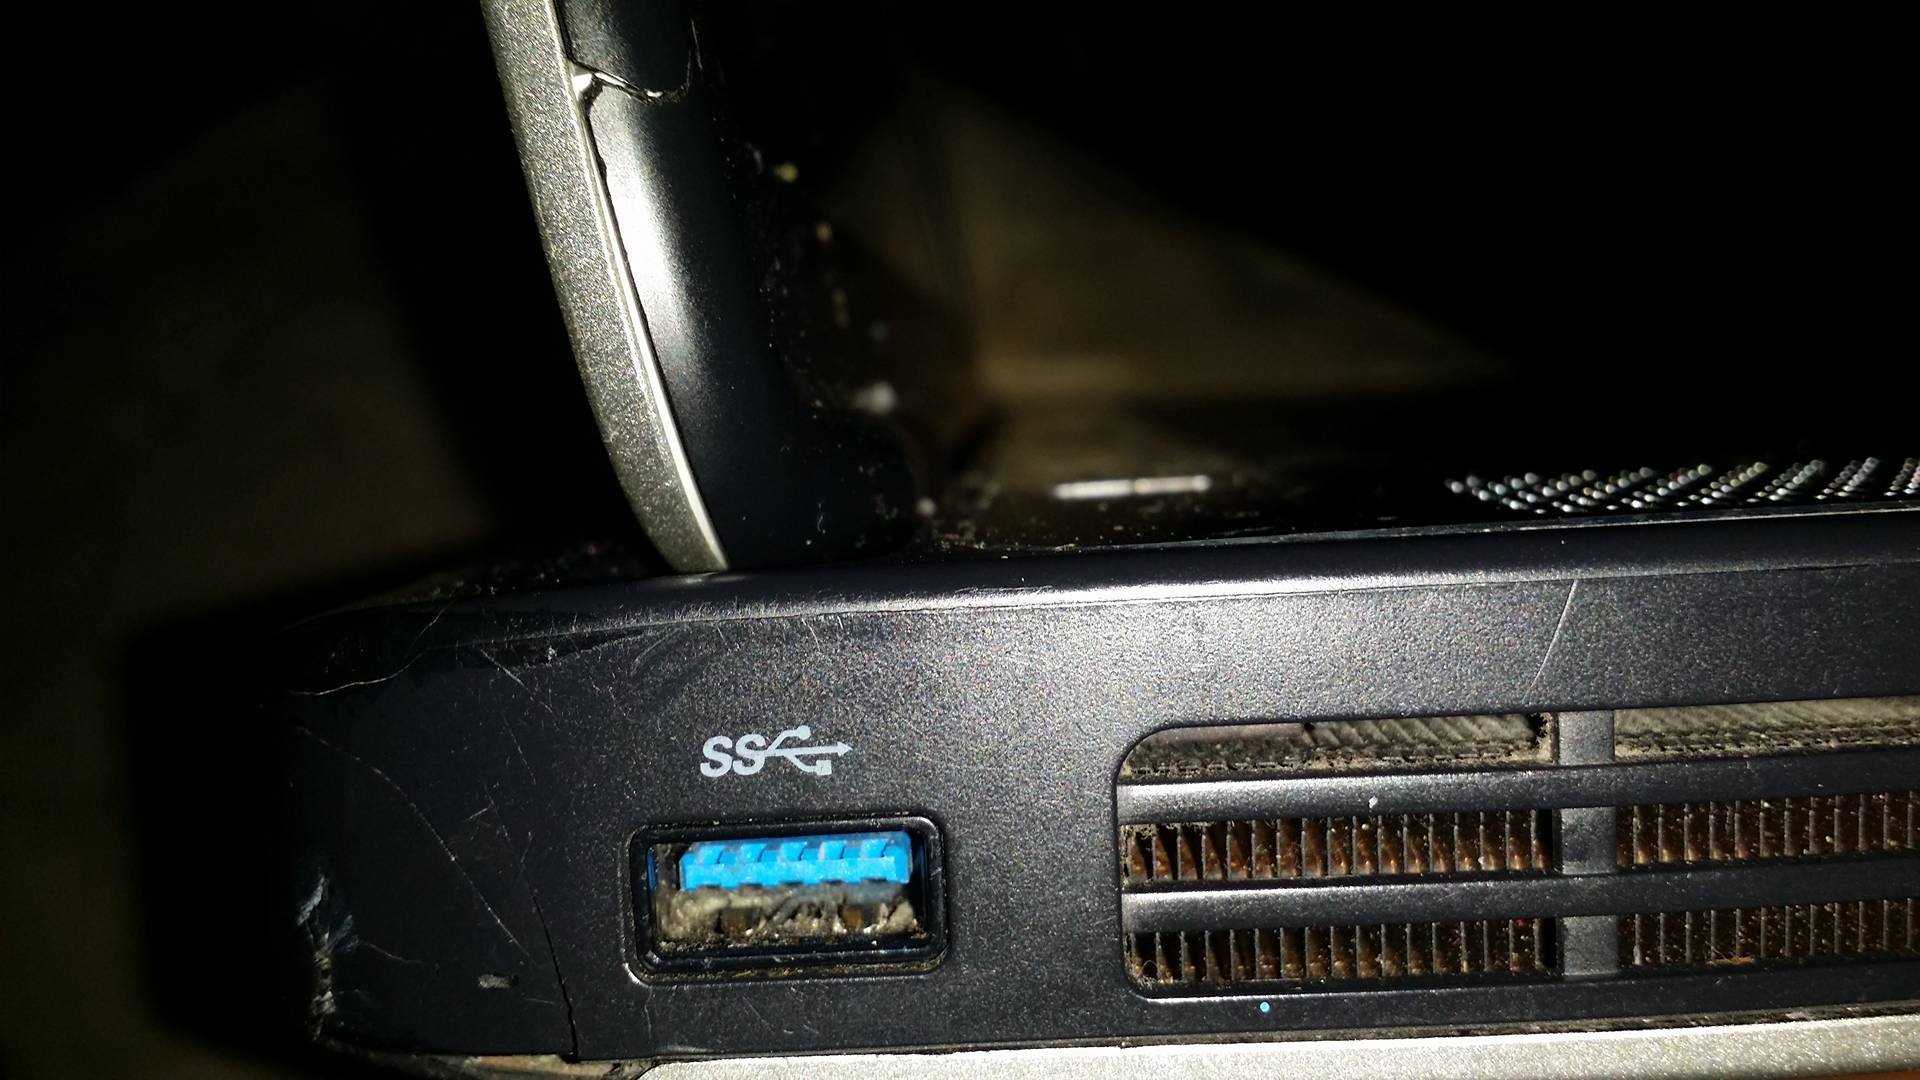 I need to connect my Dell laptop to my ProScan TV, I am ...